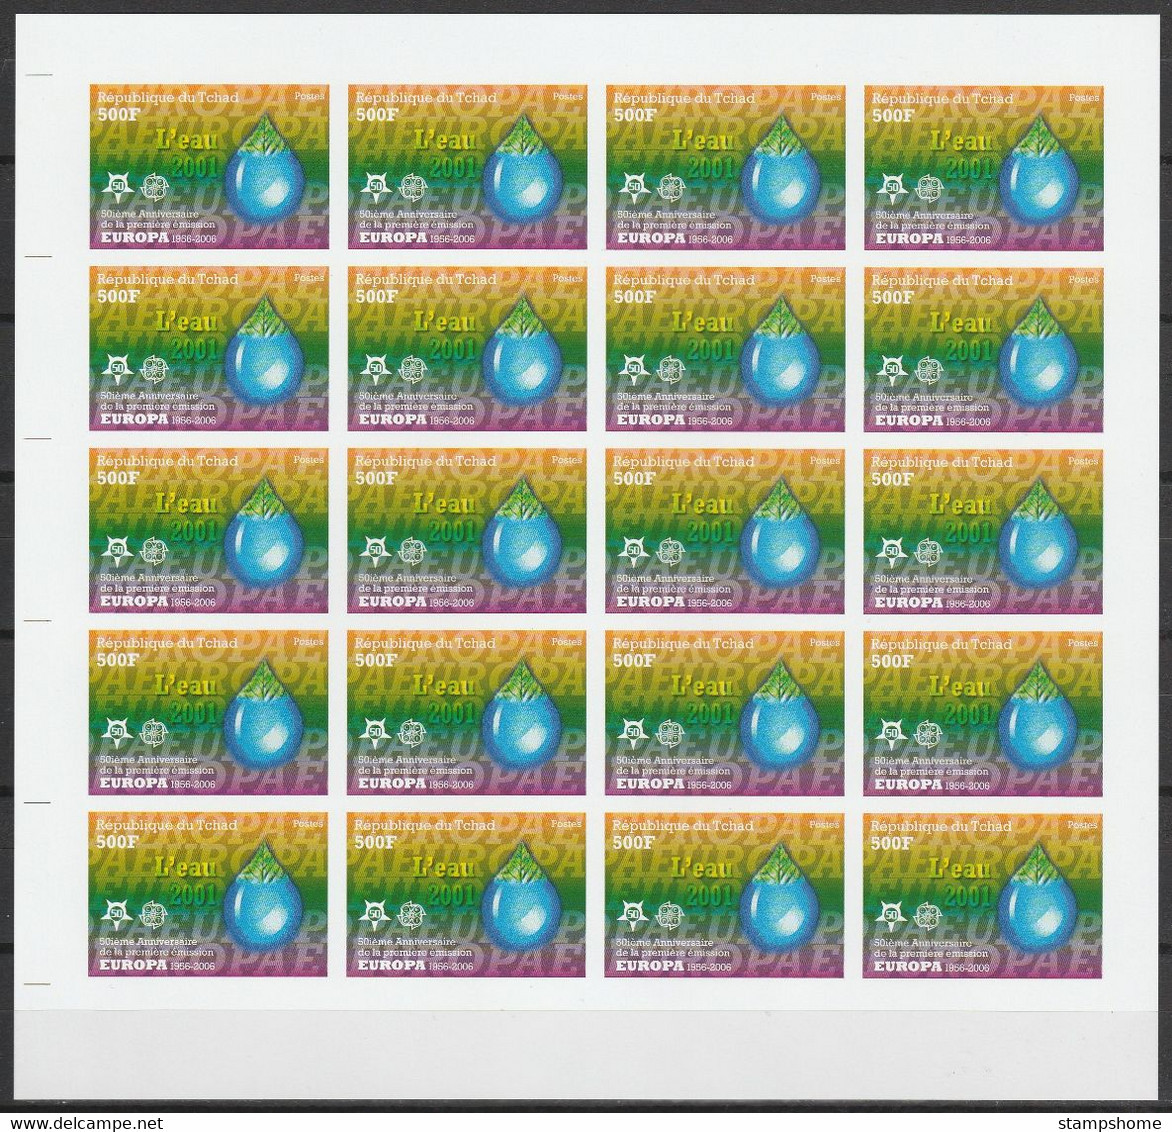 Europa Cept - 2005 - Tchad, Chad - 8.Complete Sheetlet of 20 sets - (imp.) ** MNH